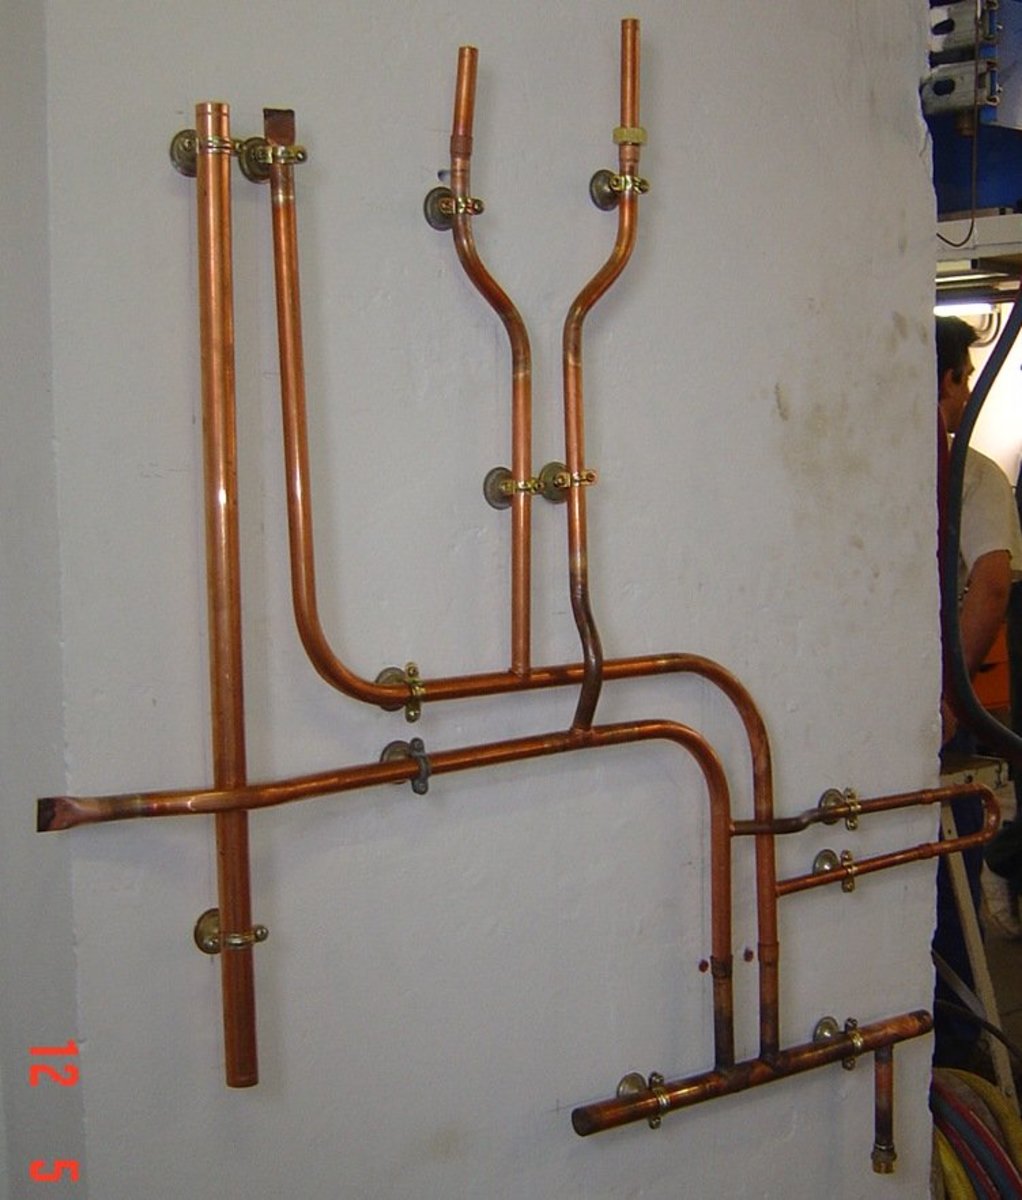 pipe plumbing tools copper bend without pipes bending shower tubing using hvac diy outdoor projects mounting welding industrial bathroom lamp